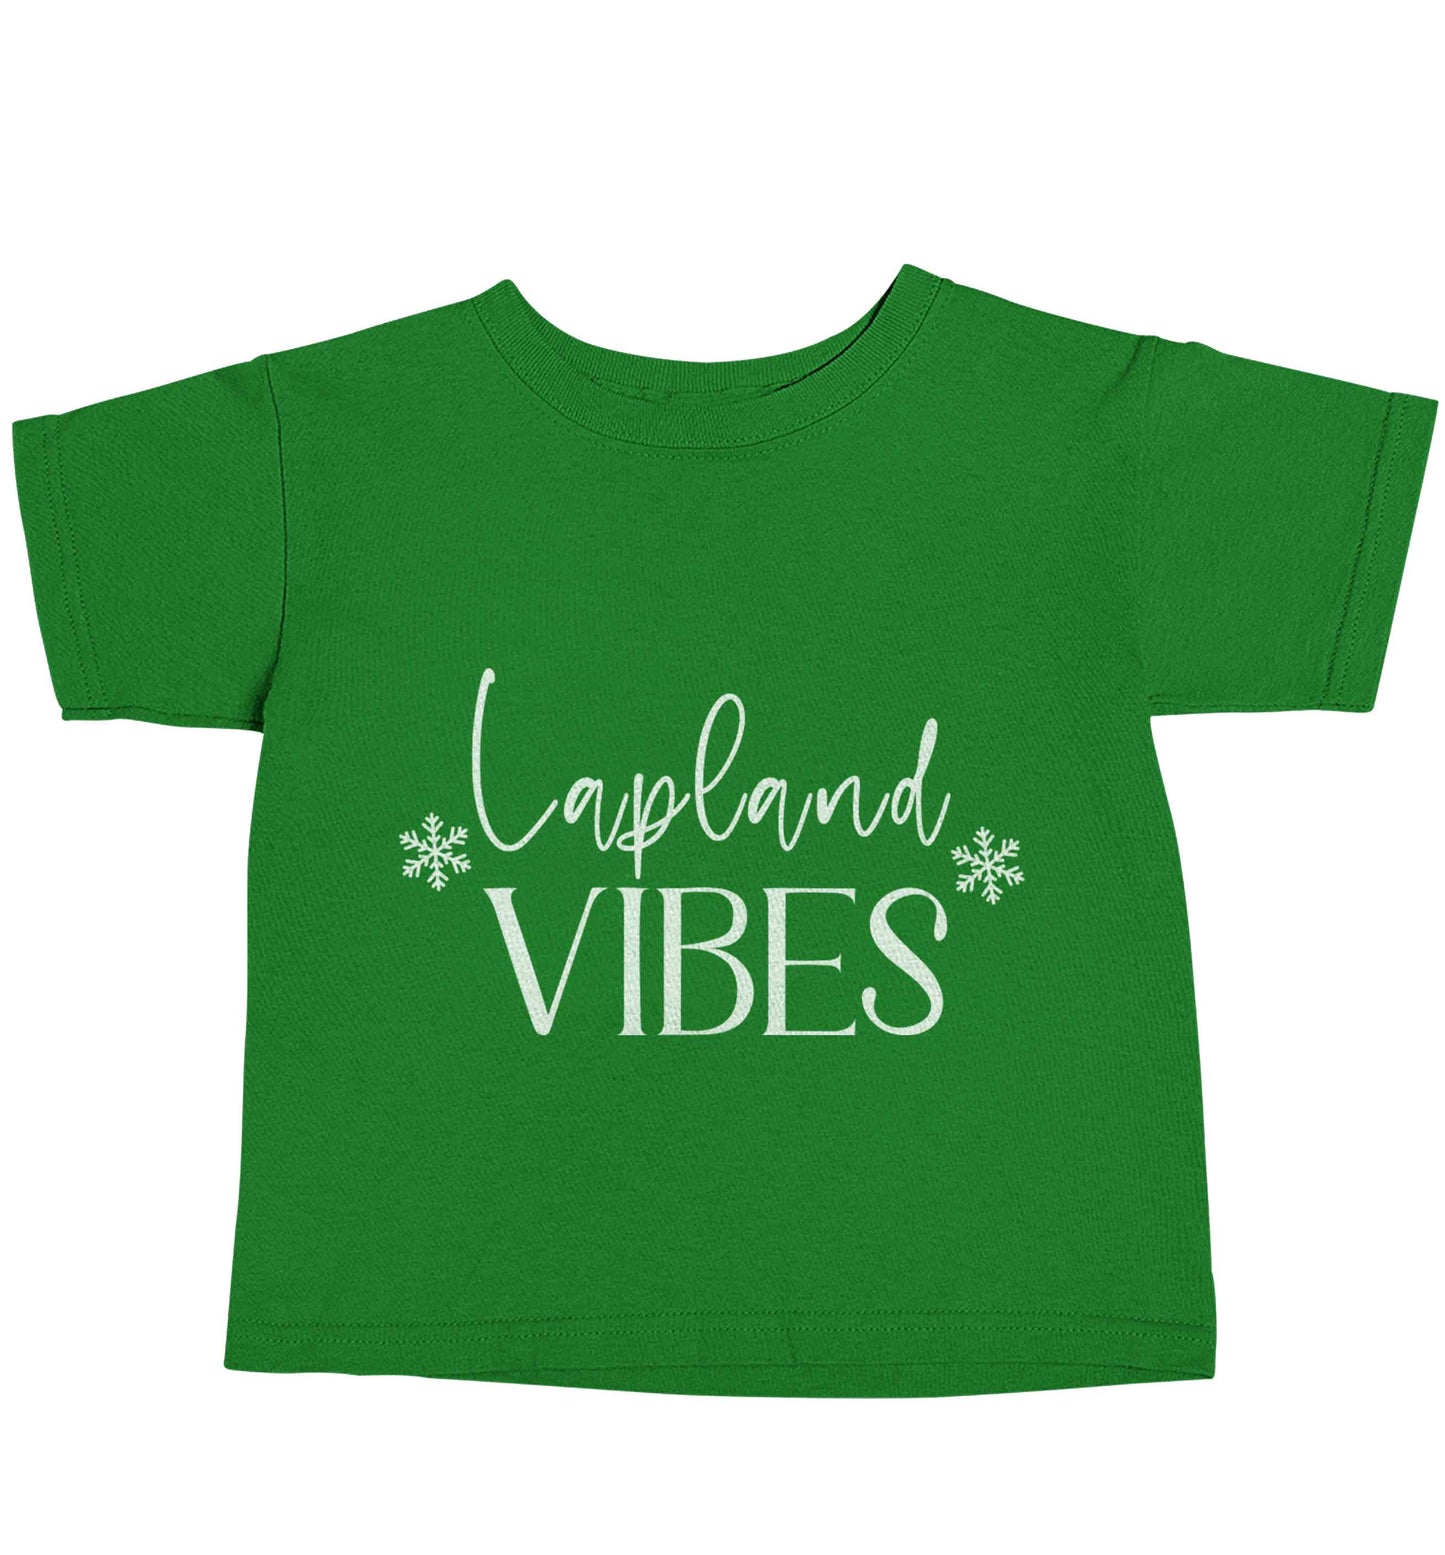 Lapland vibes green baby toddler Tshirt 2 Years